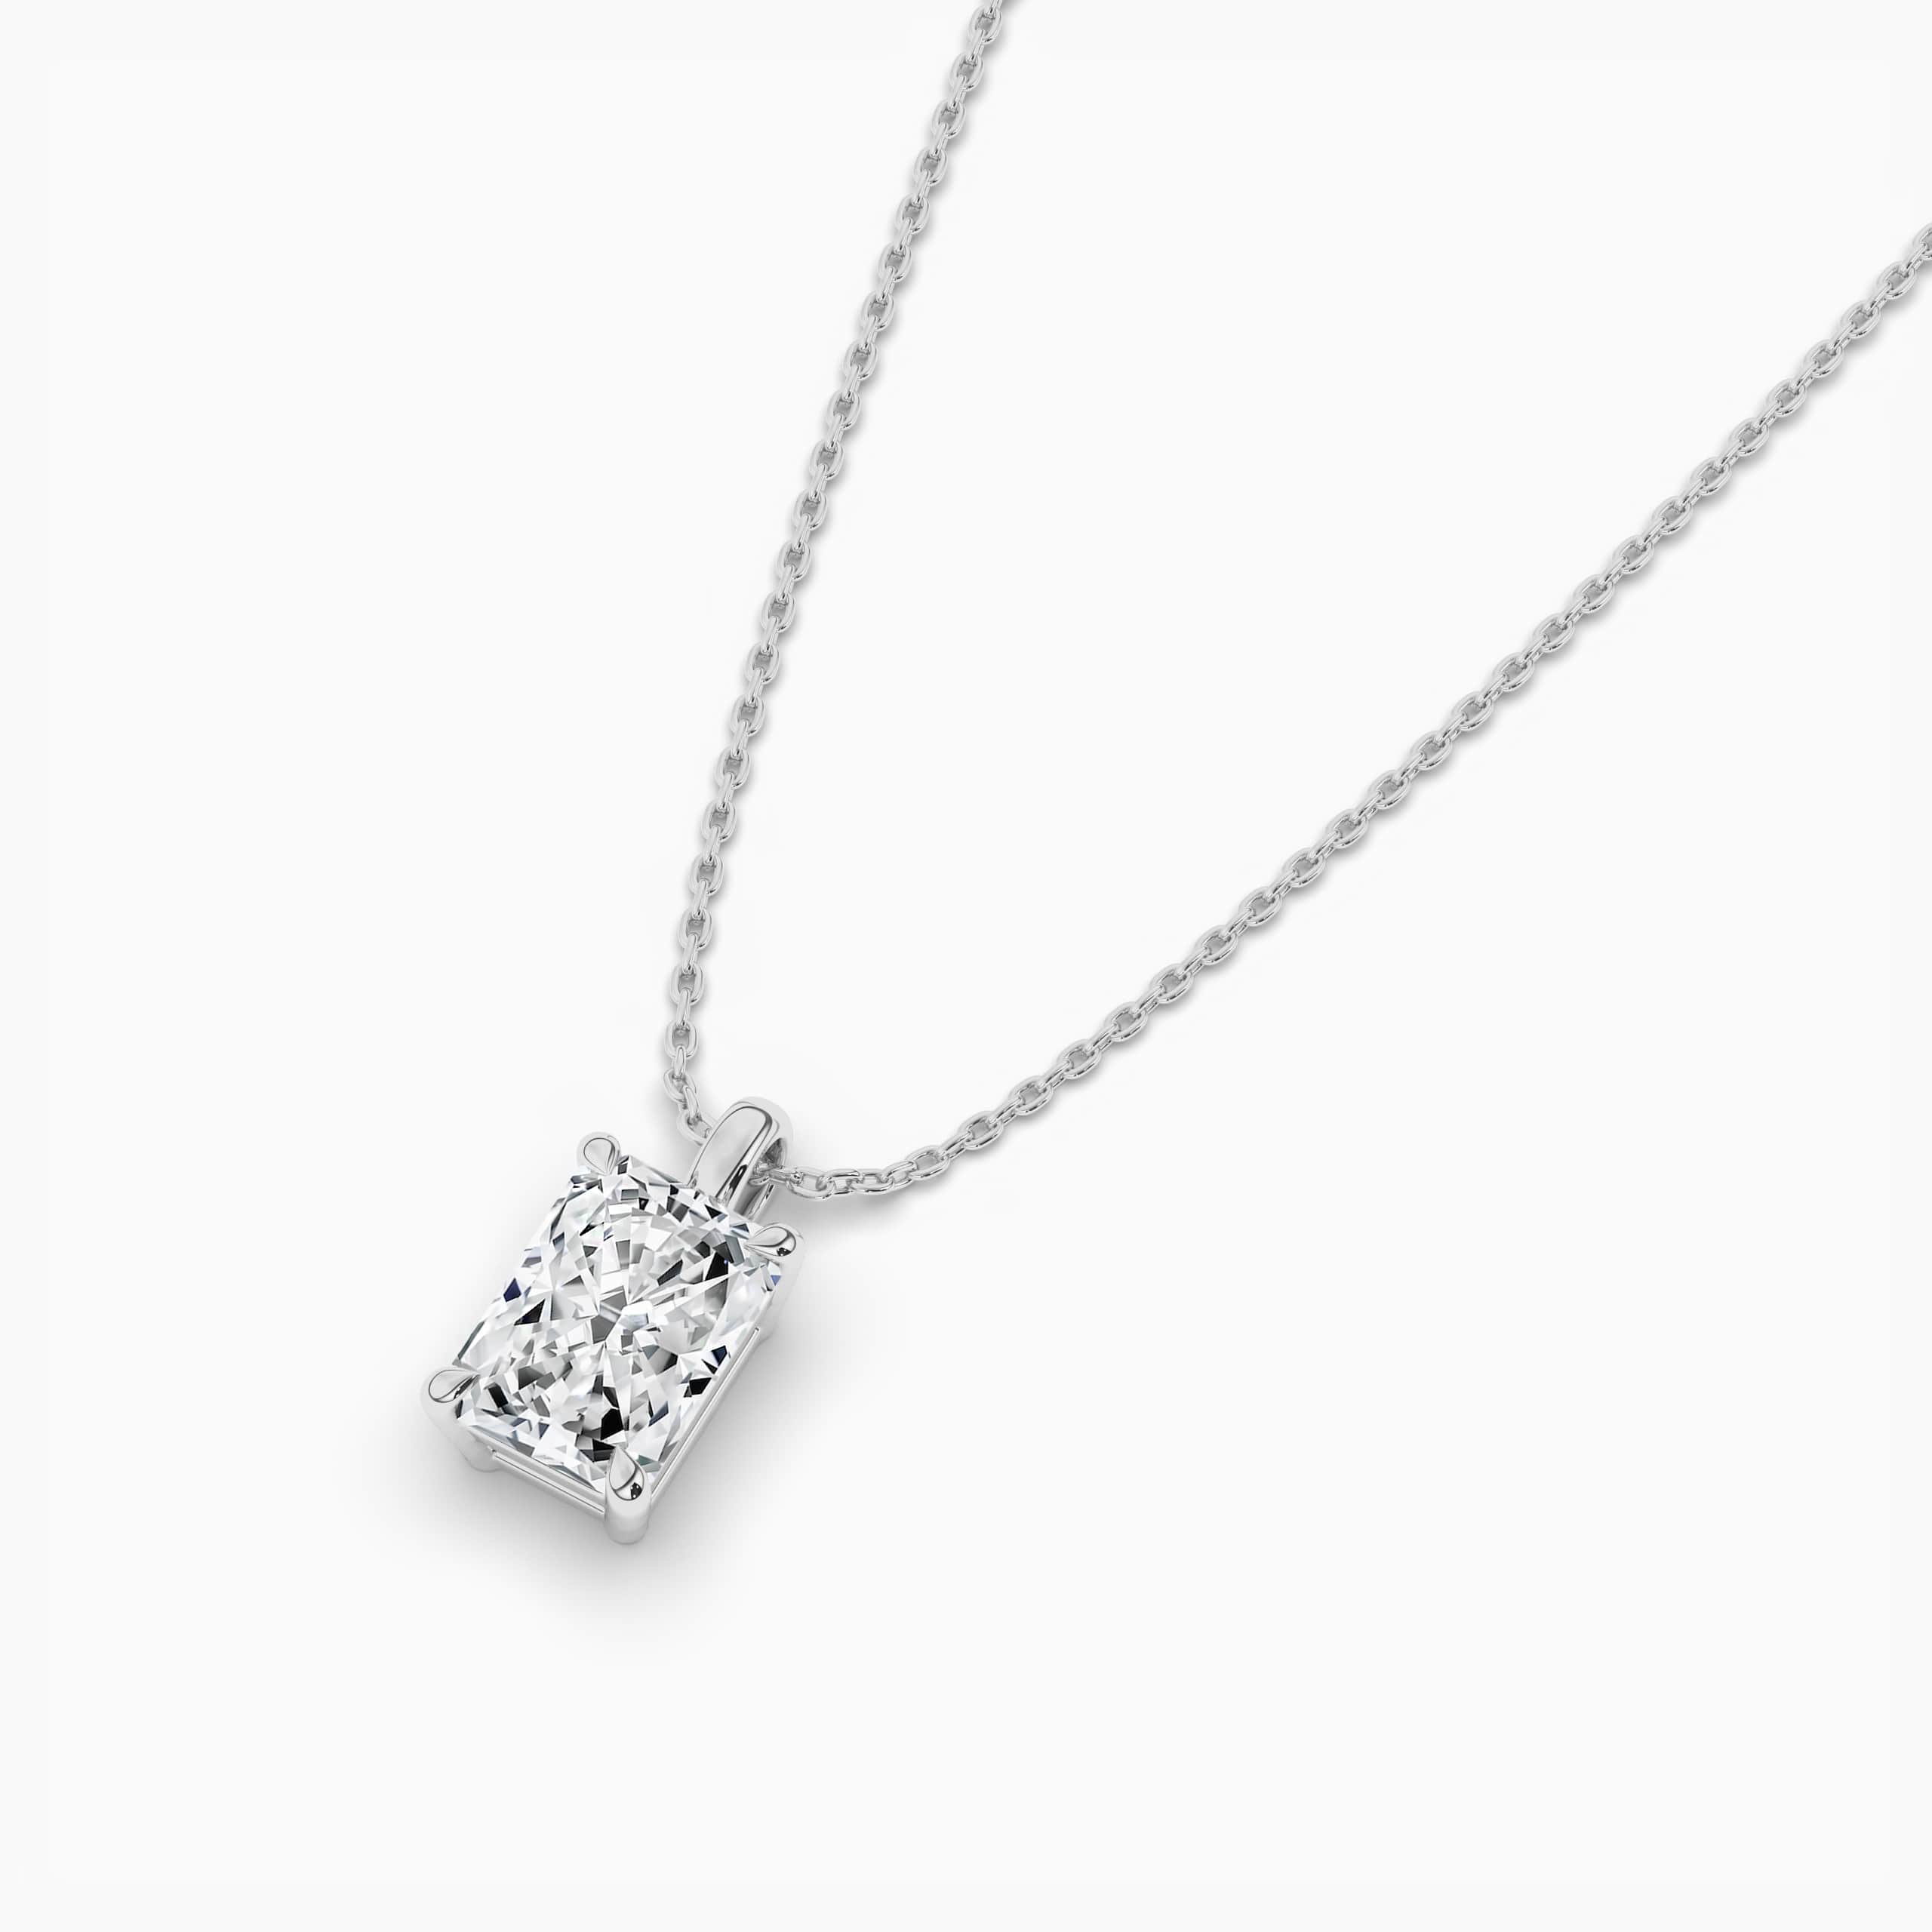 RADIANT CUT LAB CREATED DIAMOND SOLITAIRE PENDANT NECKLACE WHITE GOLD